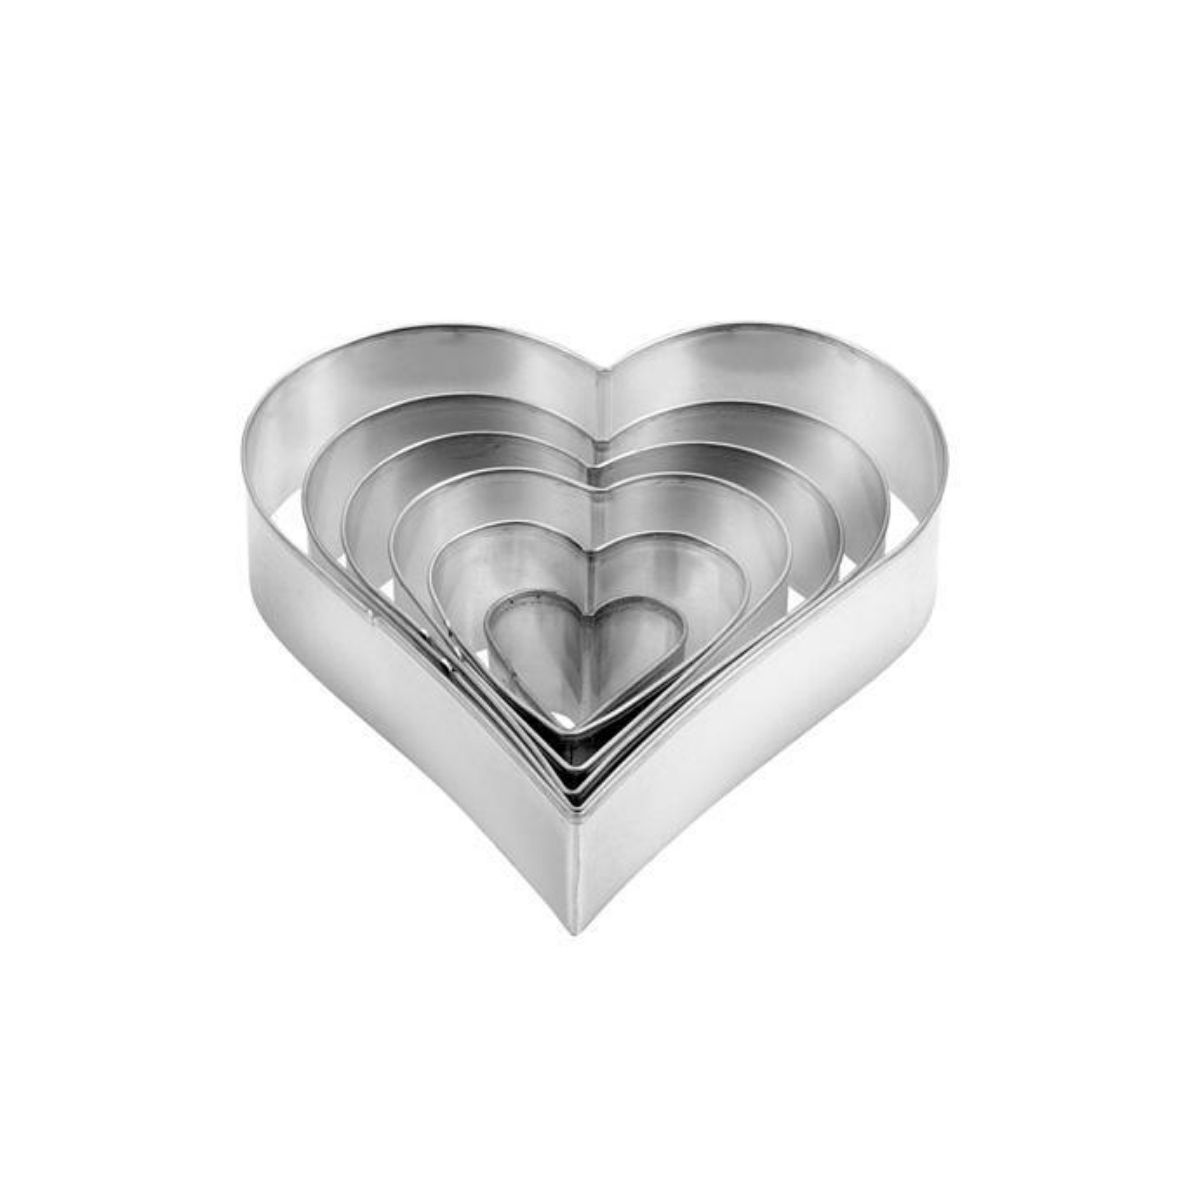 Tescoma Heart-Shaped Cookie Cutters